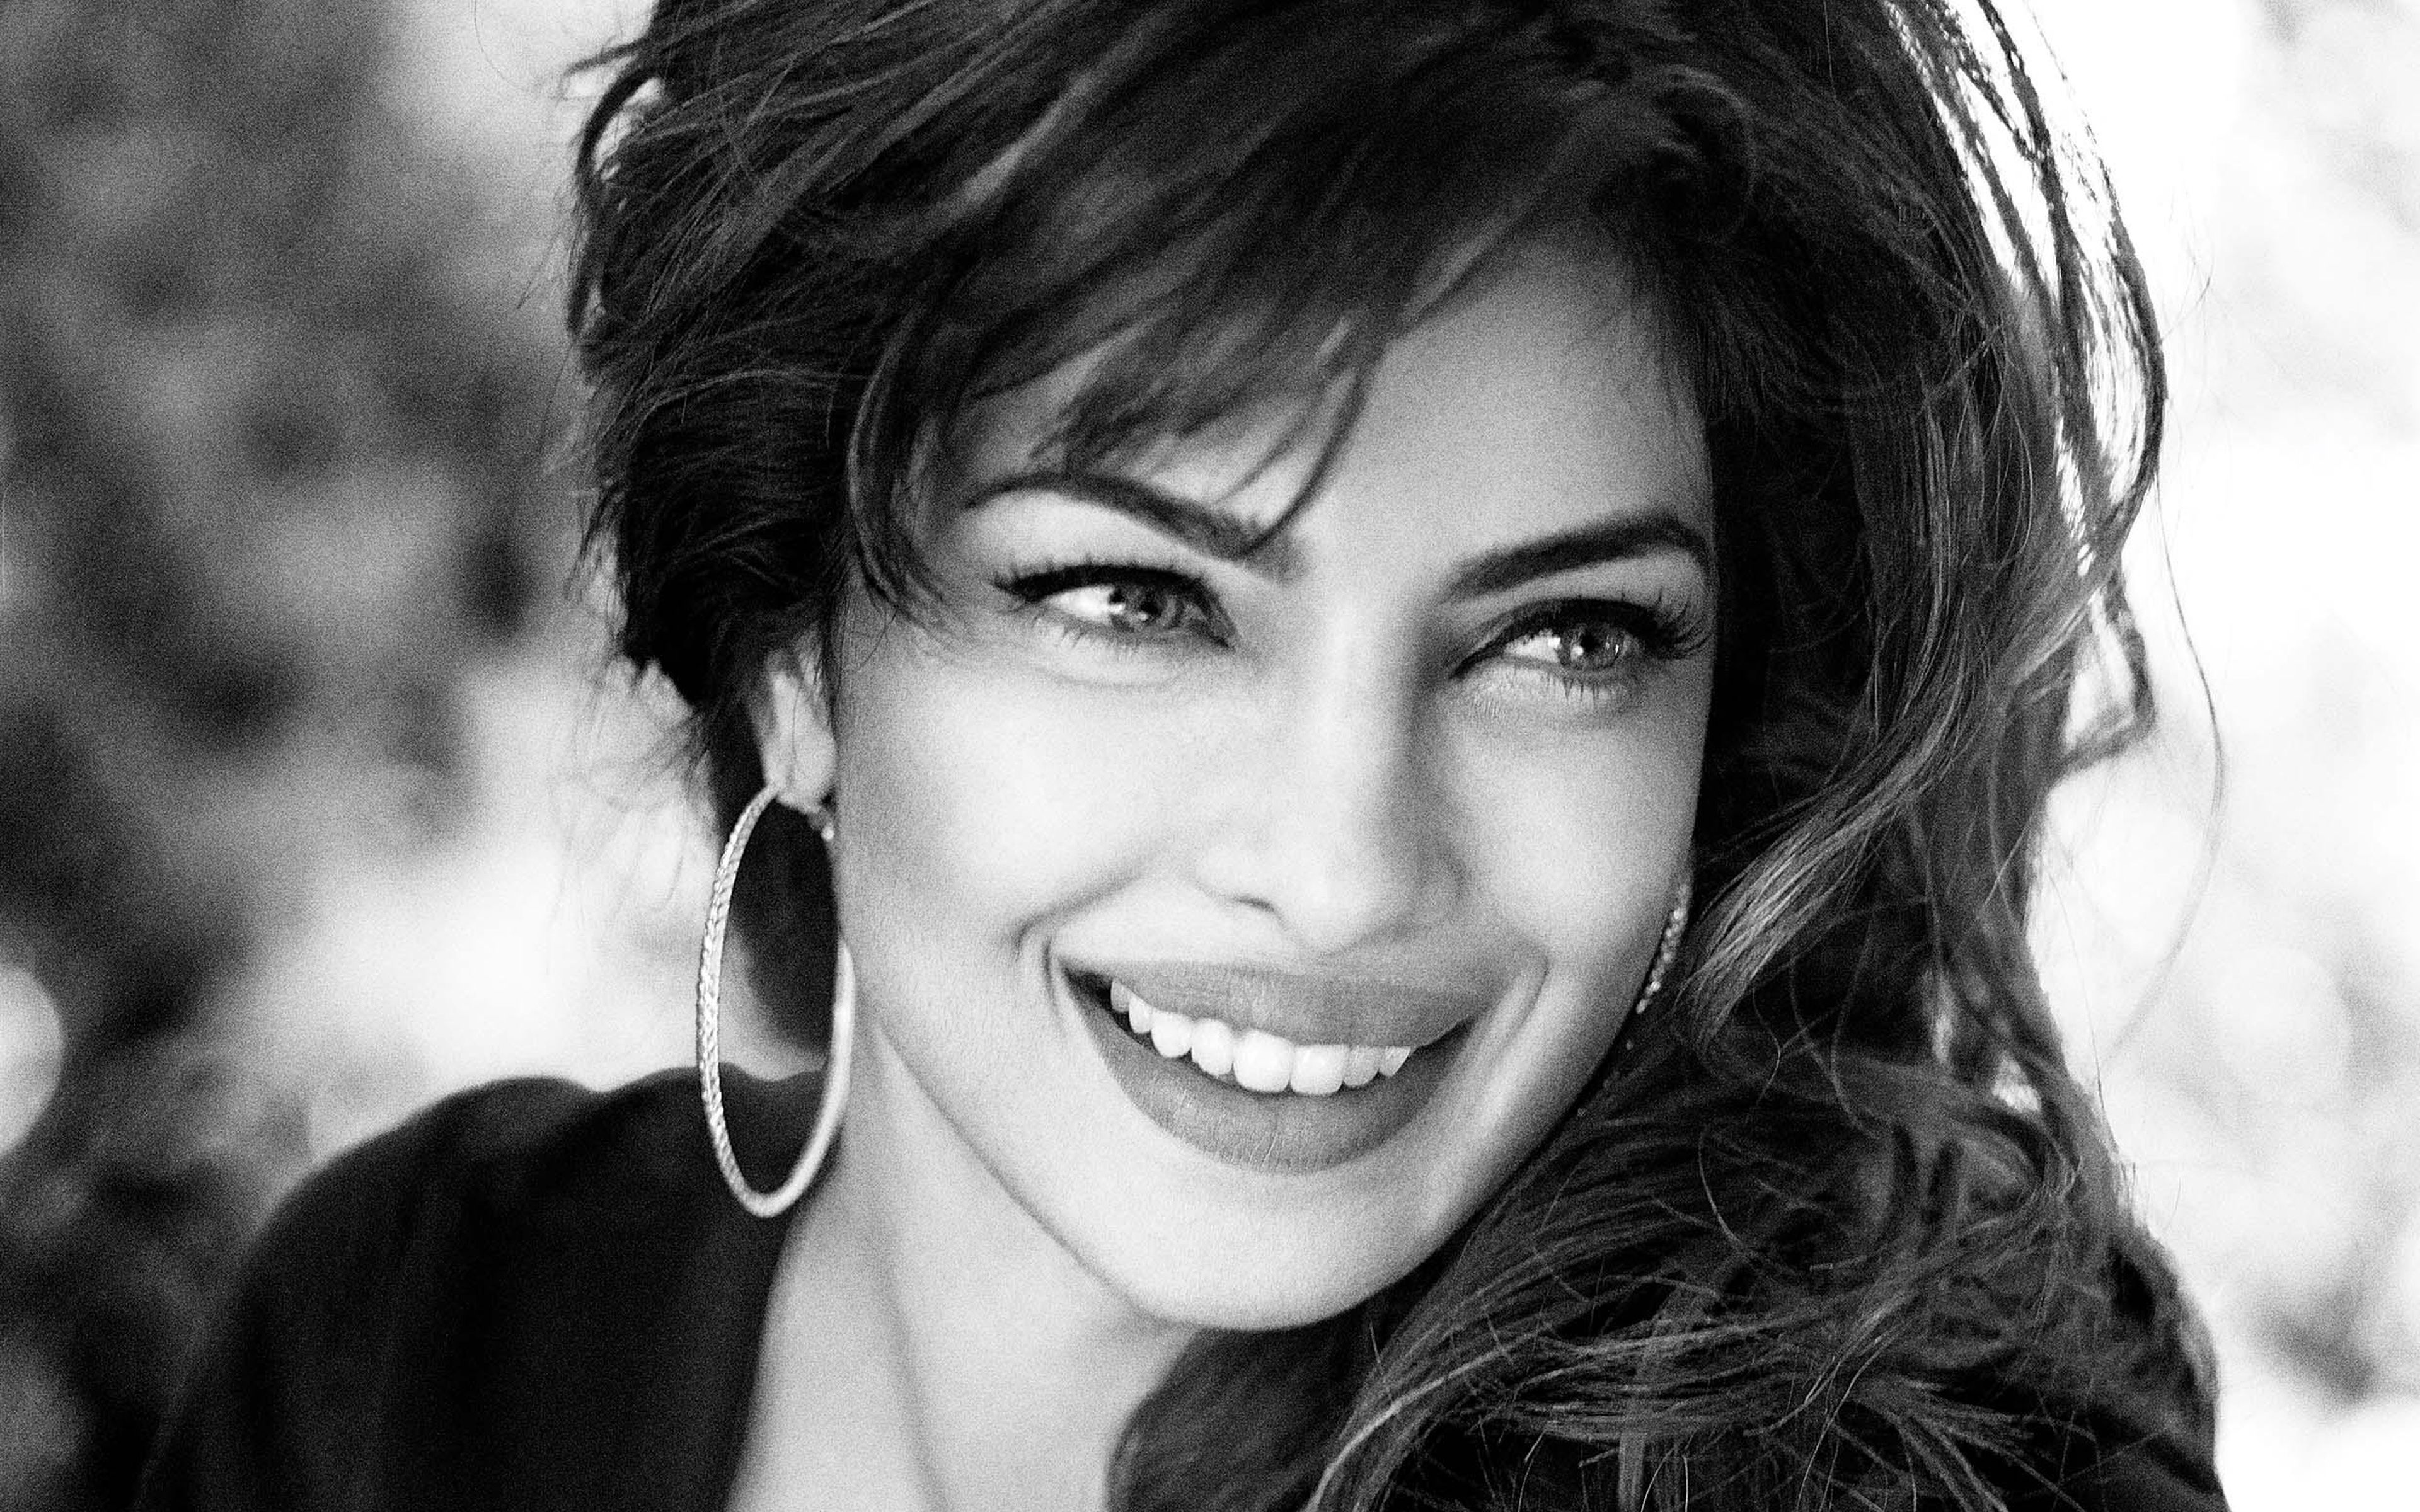 Download wallpaper Priyanka Chopra, 4K, Indian actress, black and white portrait, fashion model, beautiful woman, brunette for desktop with resolution 3840x2400. High Quality HD picture wallpaper